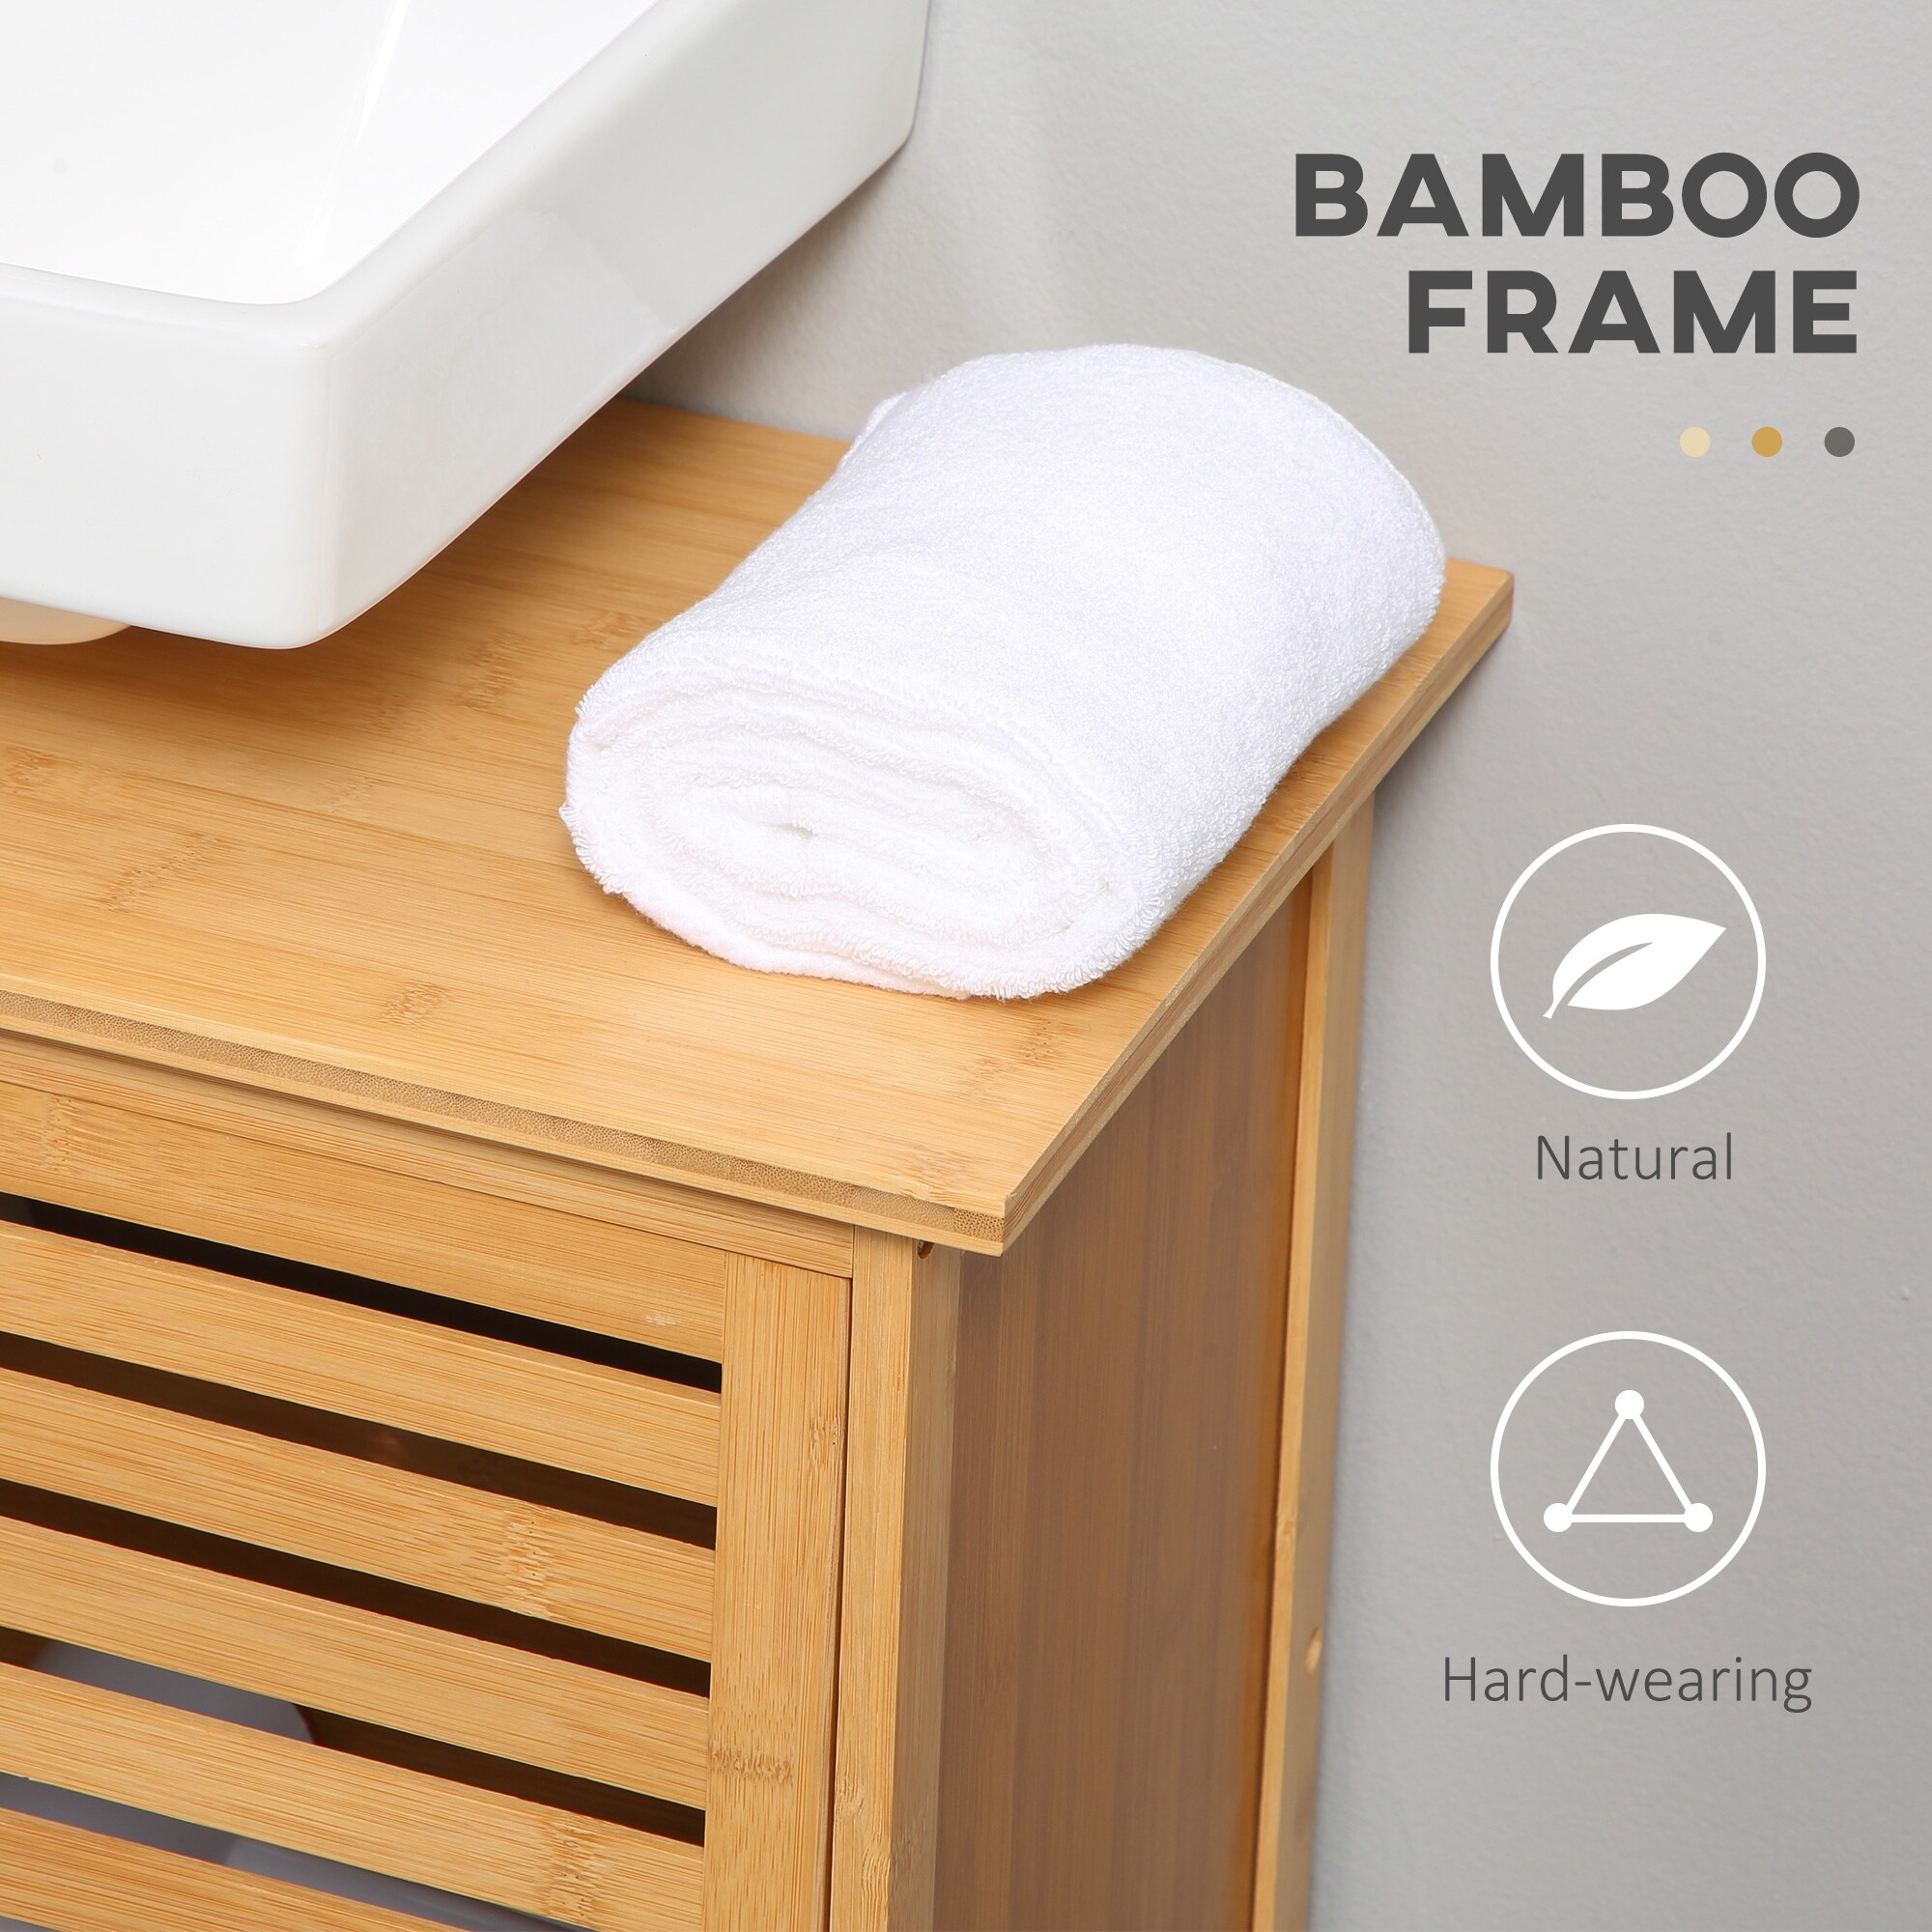 https://ak1.ostkcdn.com/images/products/is/images/direct/2c1fd0358d403bcc077b61468d7c25dbe44b036a/Bamboo-Under-Sink-Cabinet-with-2-Slatted-Doors%2C-Freestanding-Bathroom-Sink-Cabinet-Space-Saver-Organizer.jpg